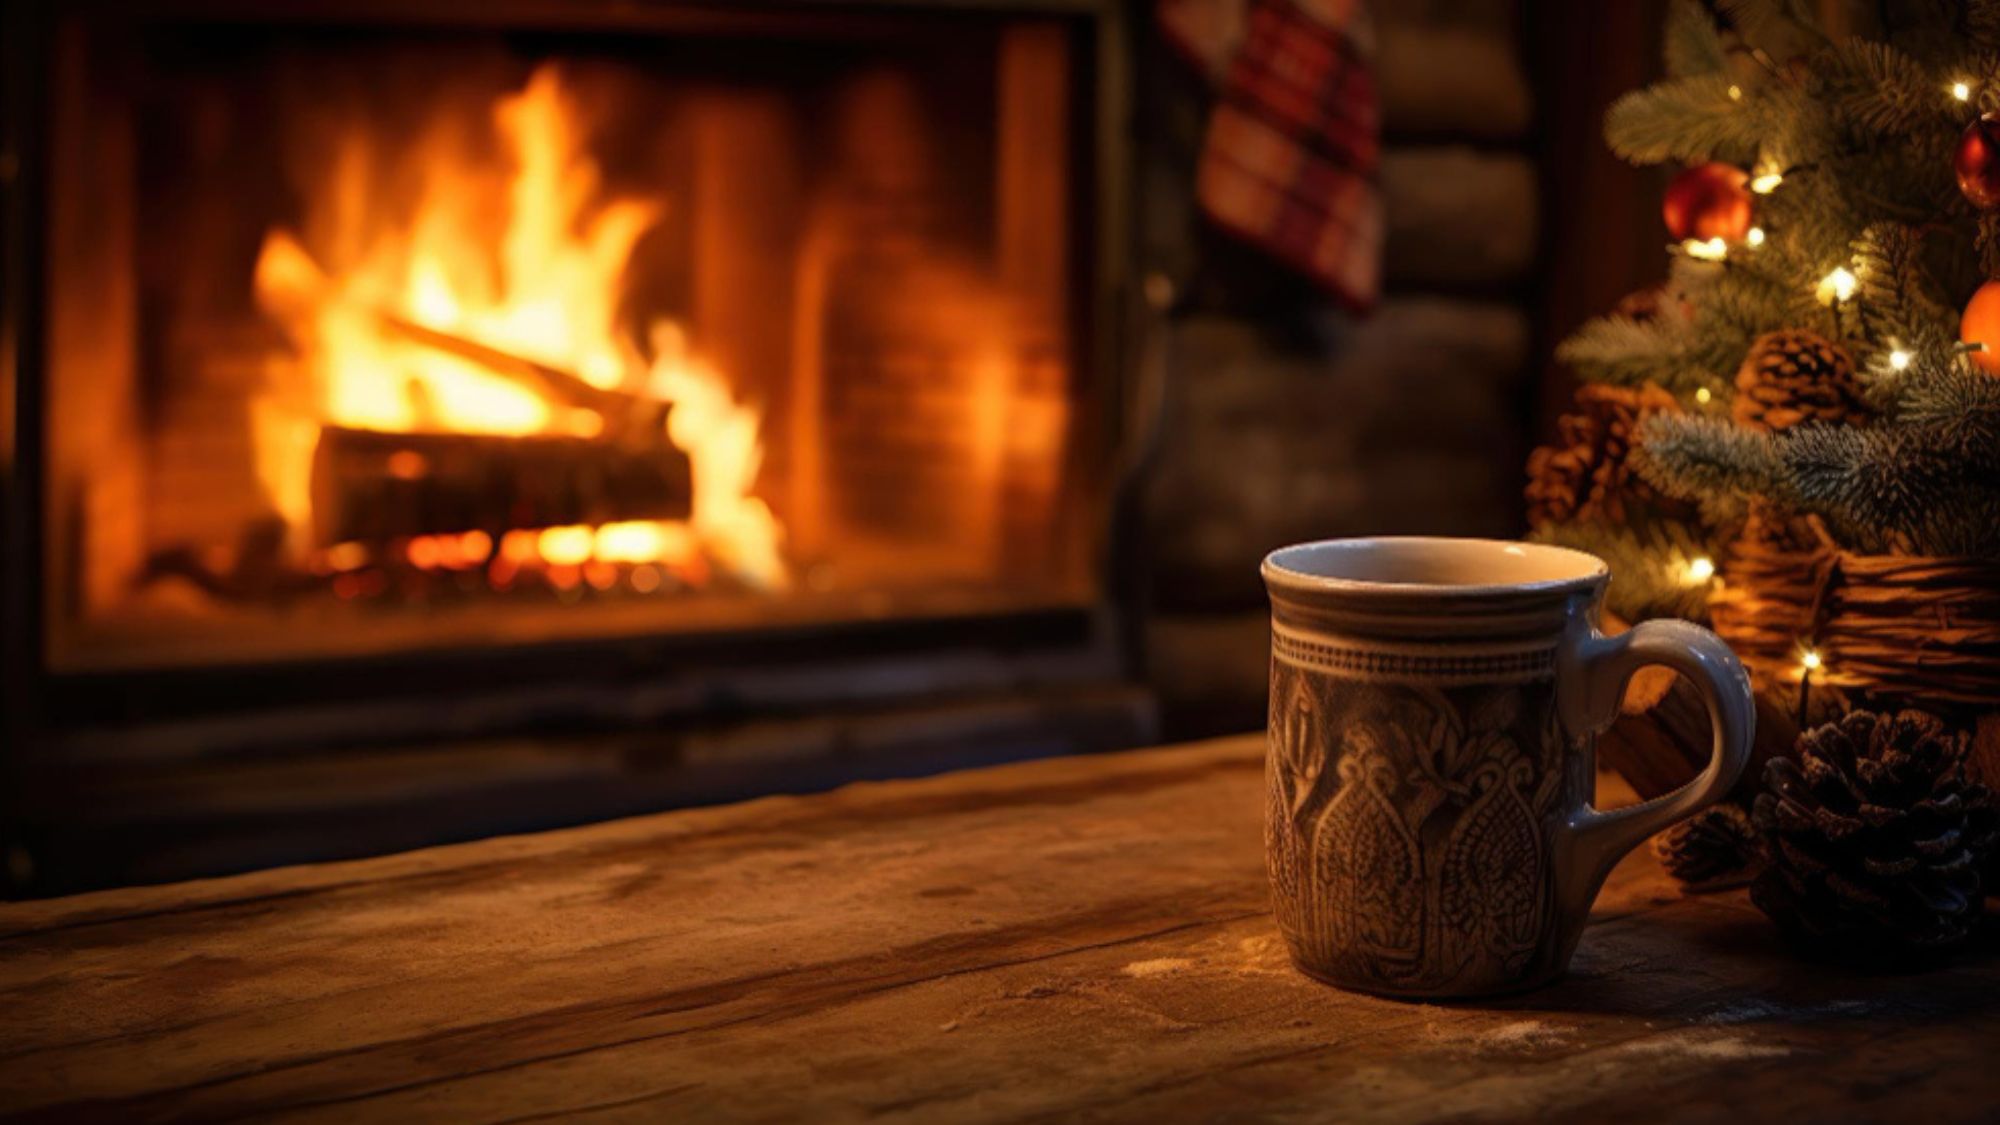 A cup of coffee and fire idea to keep your home warm for winters